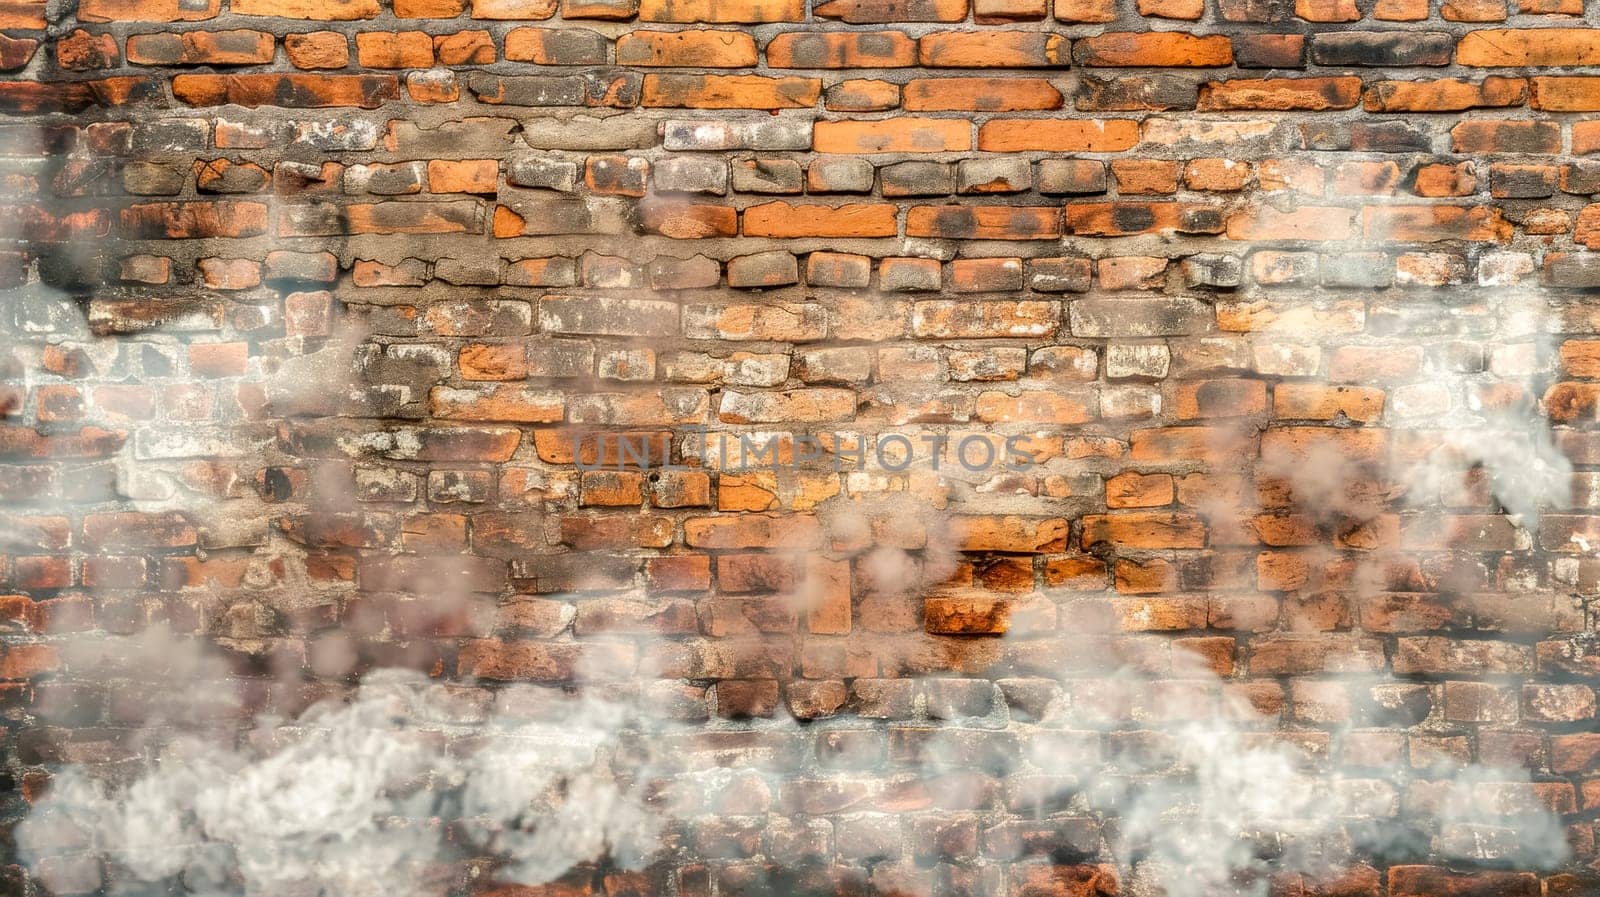 Vintage brick wall partially obscured by a soft, ethereal fog